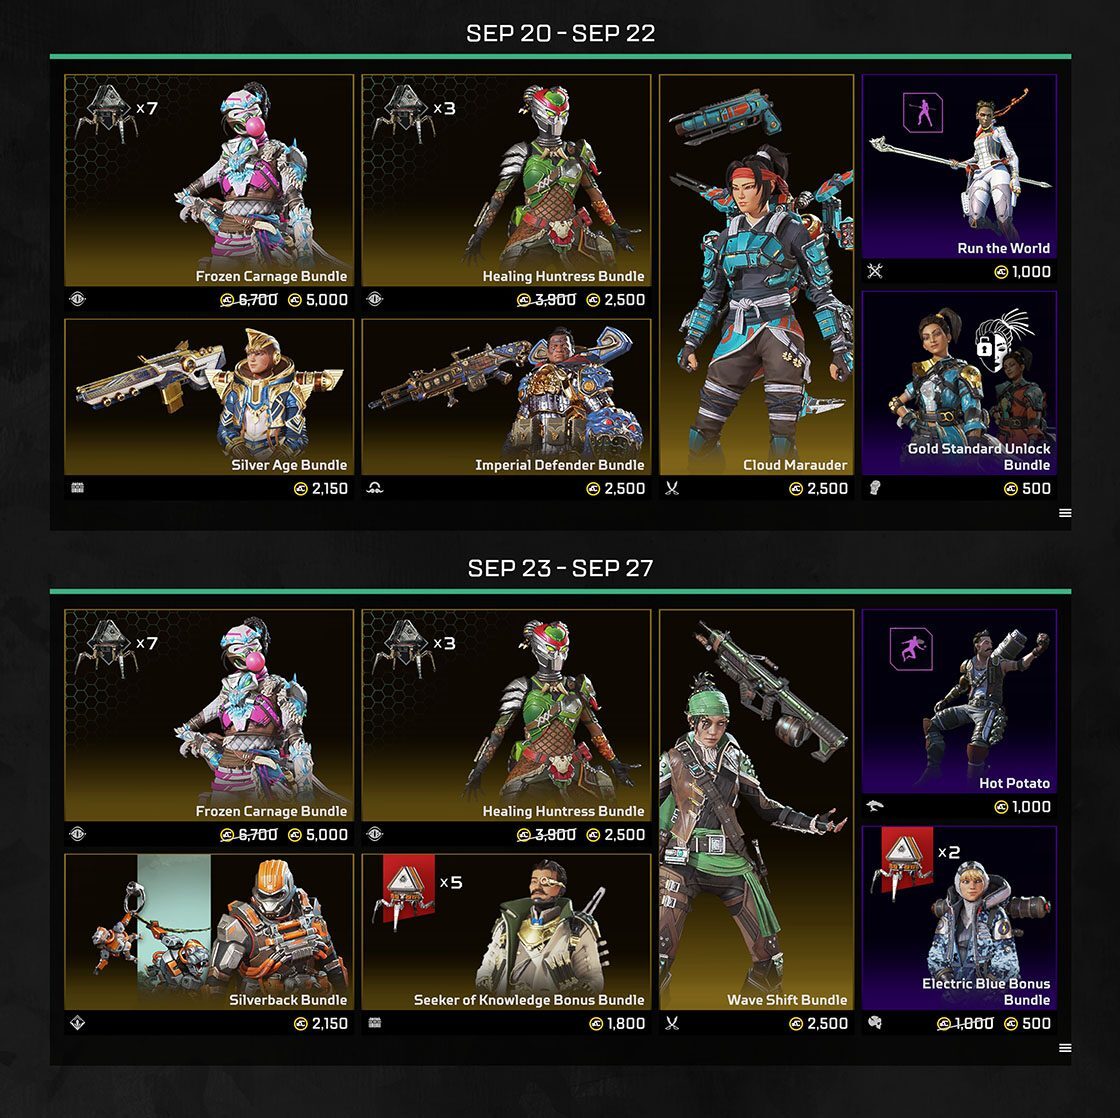 Store bundles contain old and new skins.